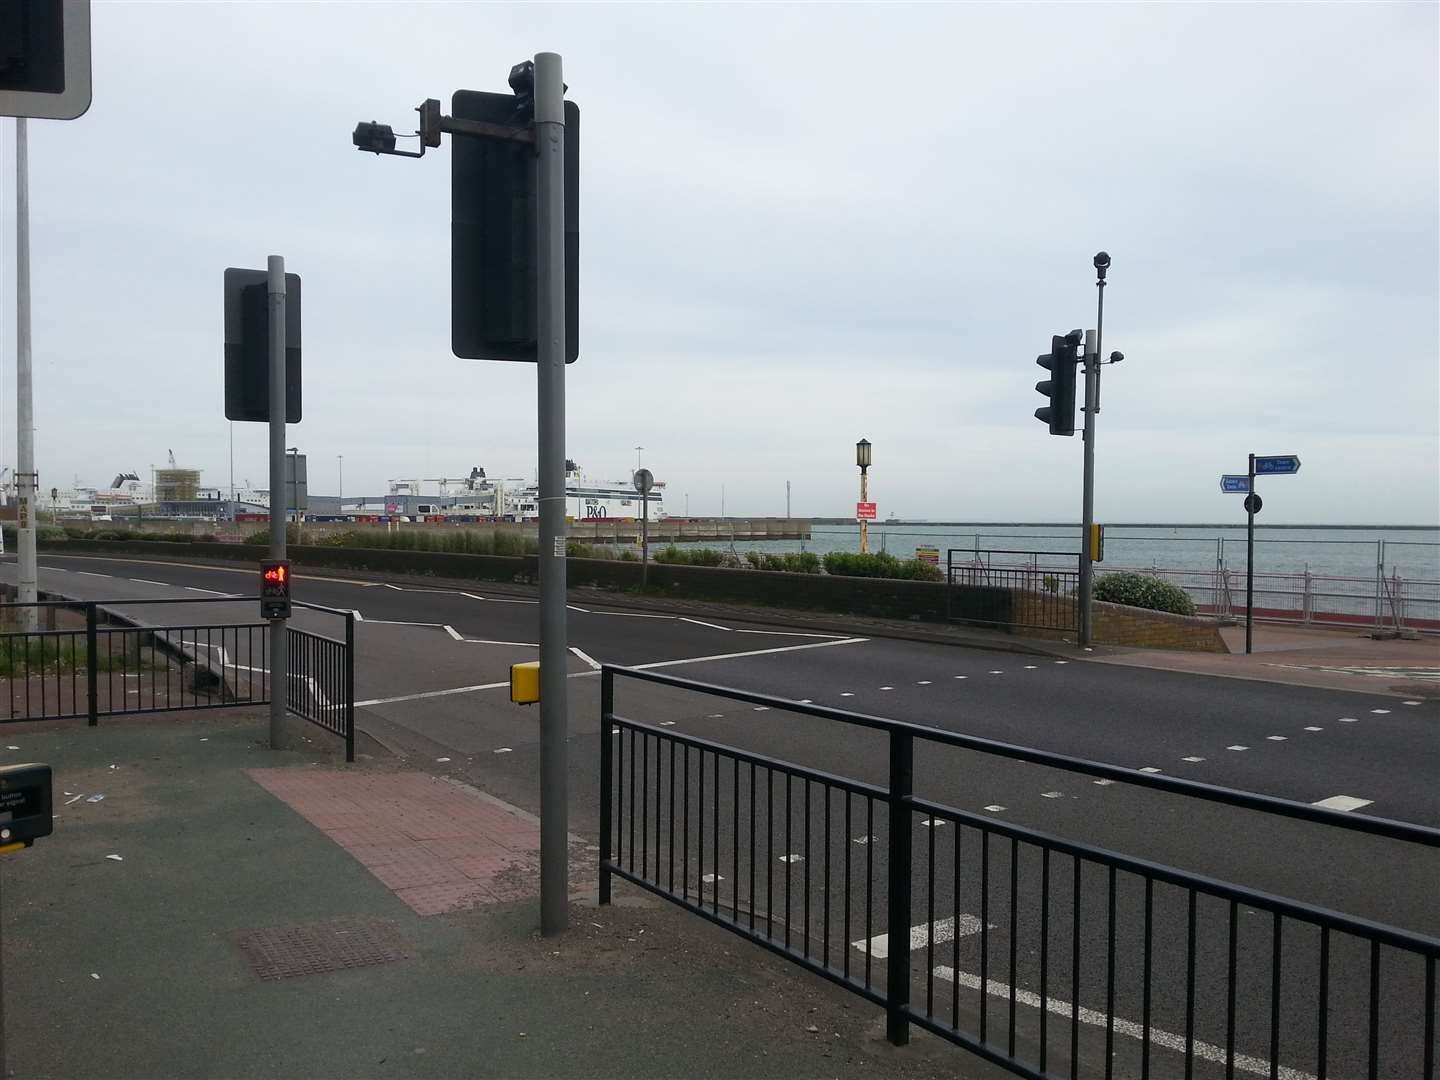 The crossing area at Townwall Street, Dover, where Simon Howard was killed.